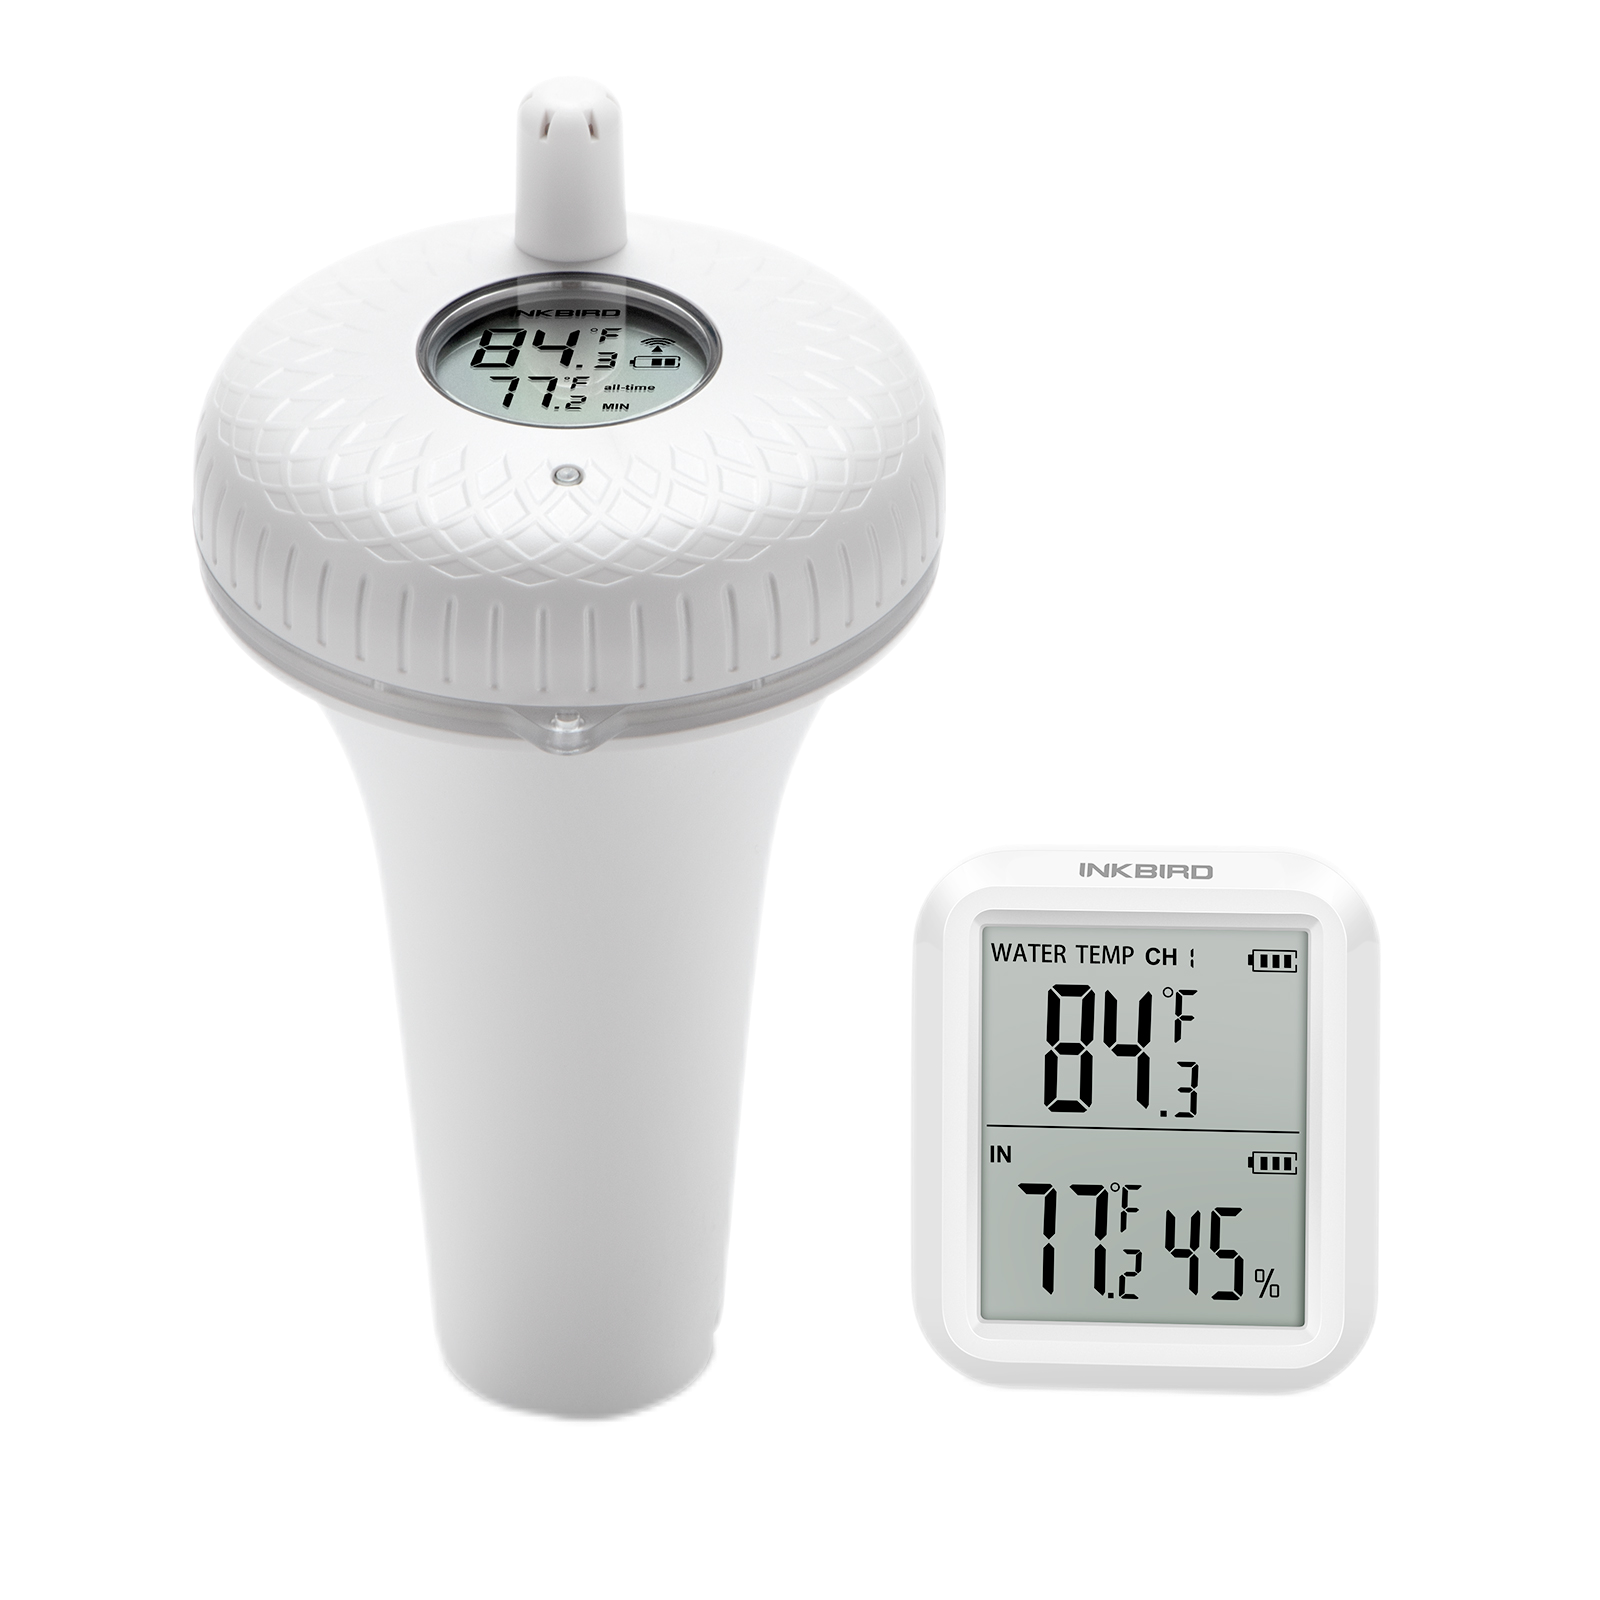 https://www.momjunction.com/wp-content/uploads/product-images/inkbird-wireless-pool-thermometer_afl1470.png